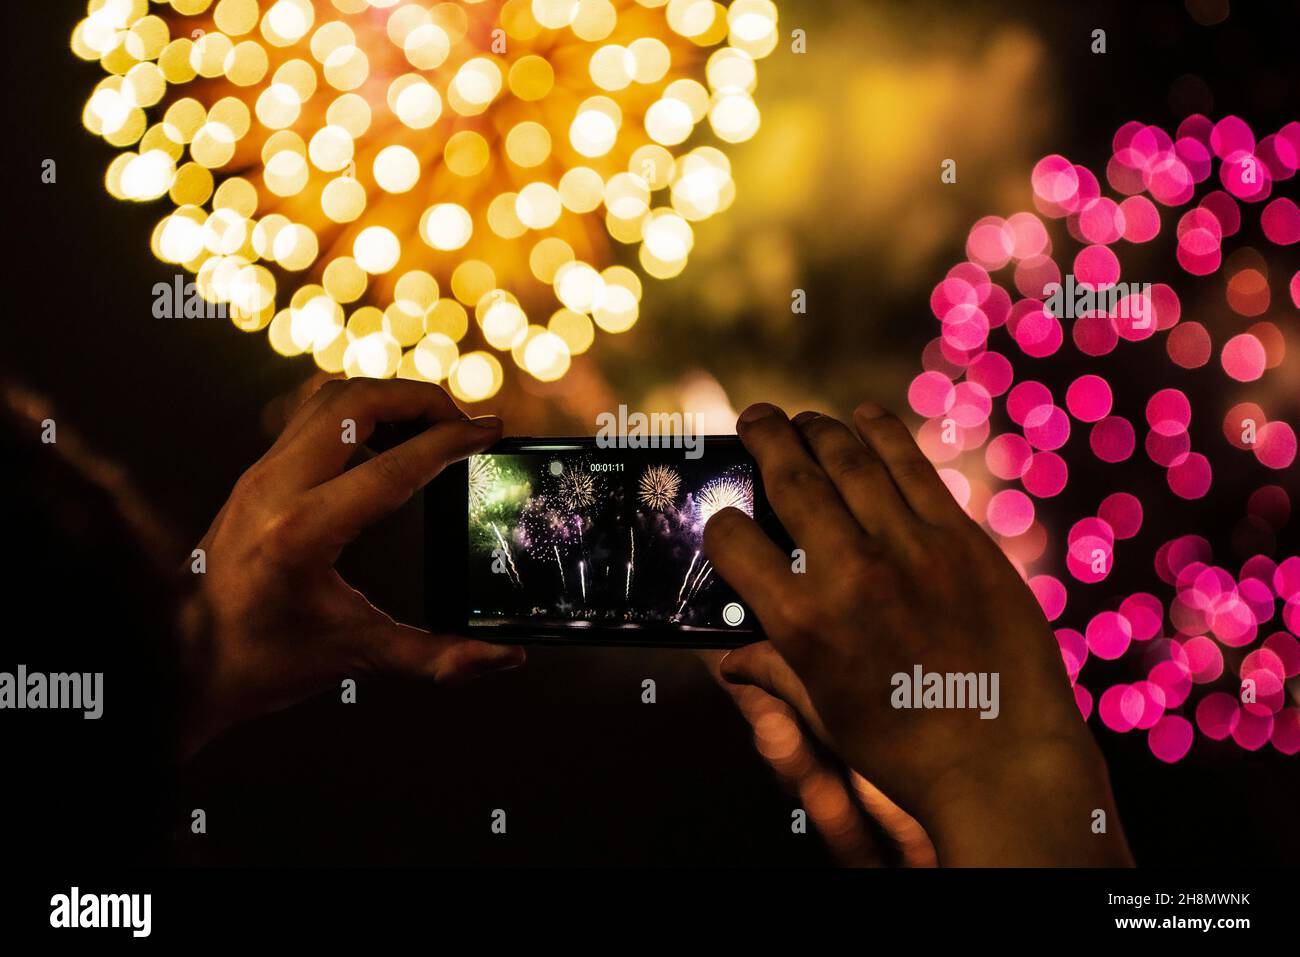 Hand holding mobile phone, smartphone filming fireworks, New Year's Eve Stock Photo